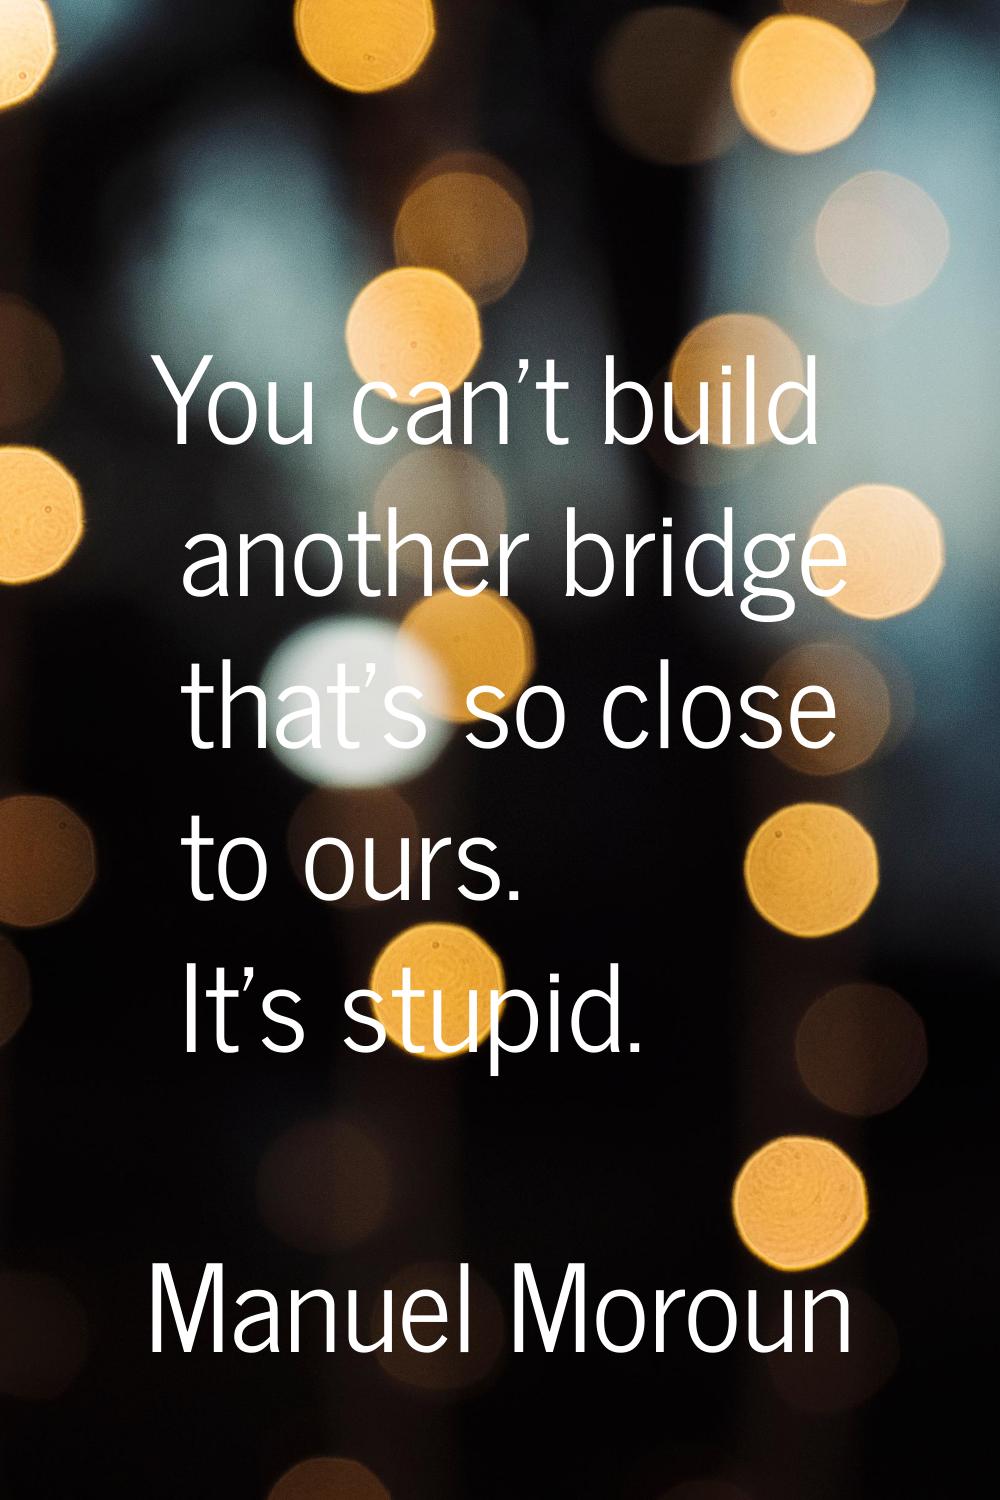 You can't build another bridge that's so close to ours. It's stupid.